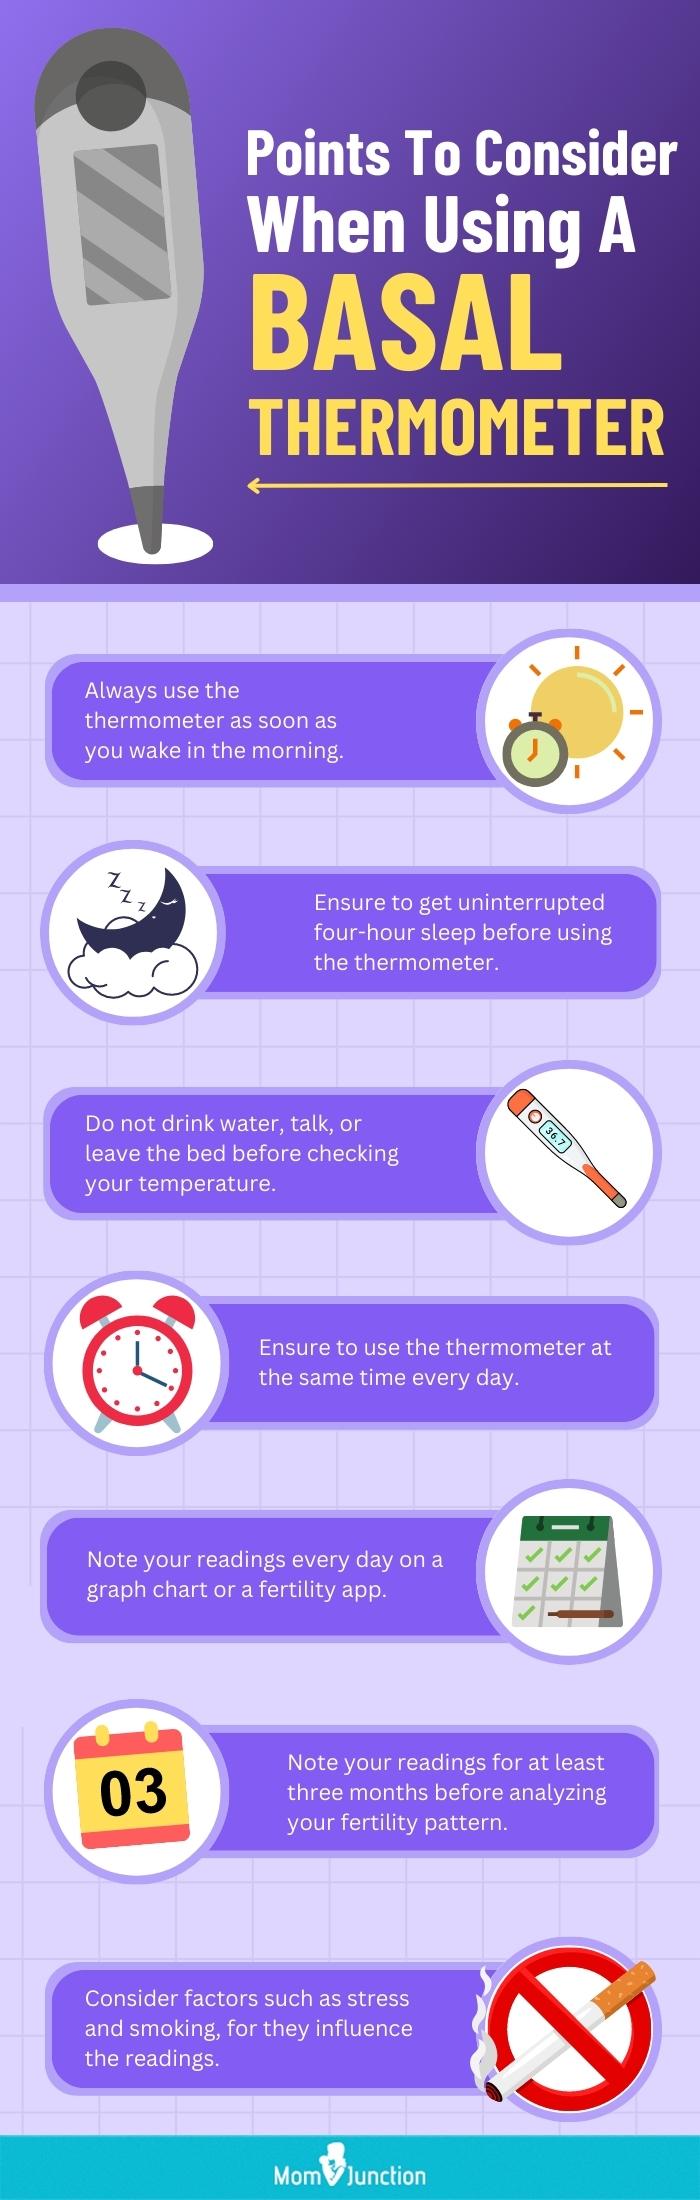 Points To Consider When Using A Basal Thermometer(infographic)